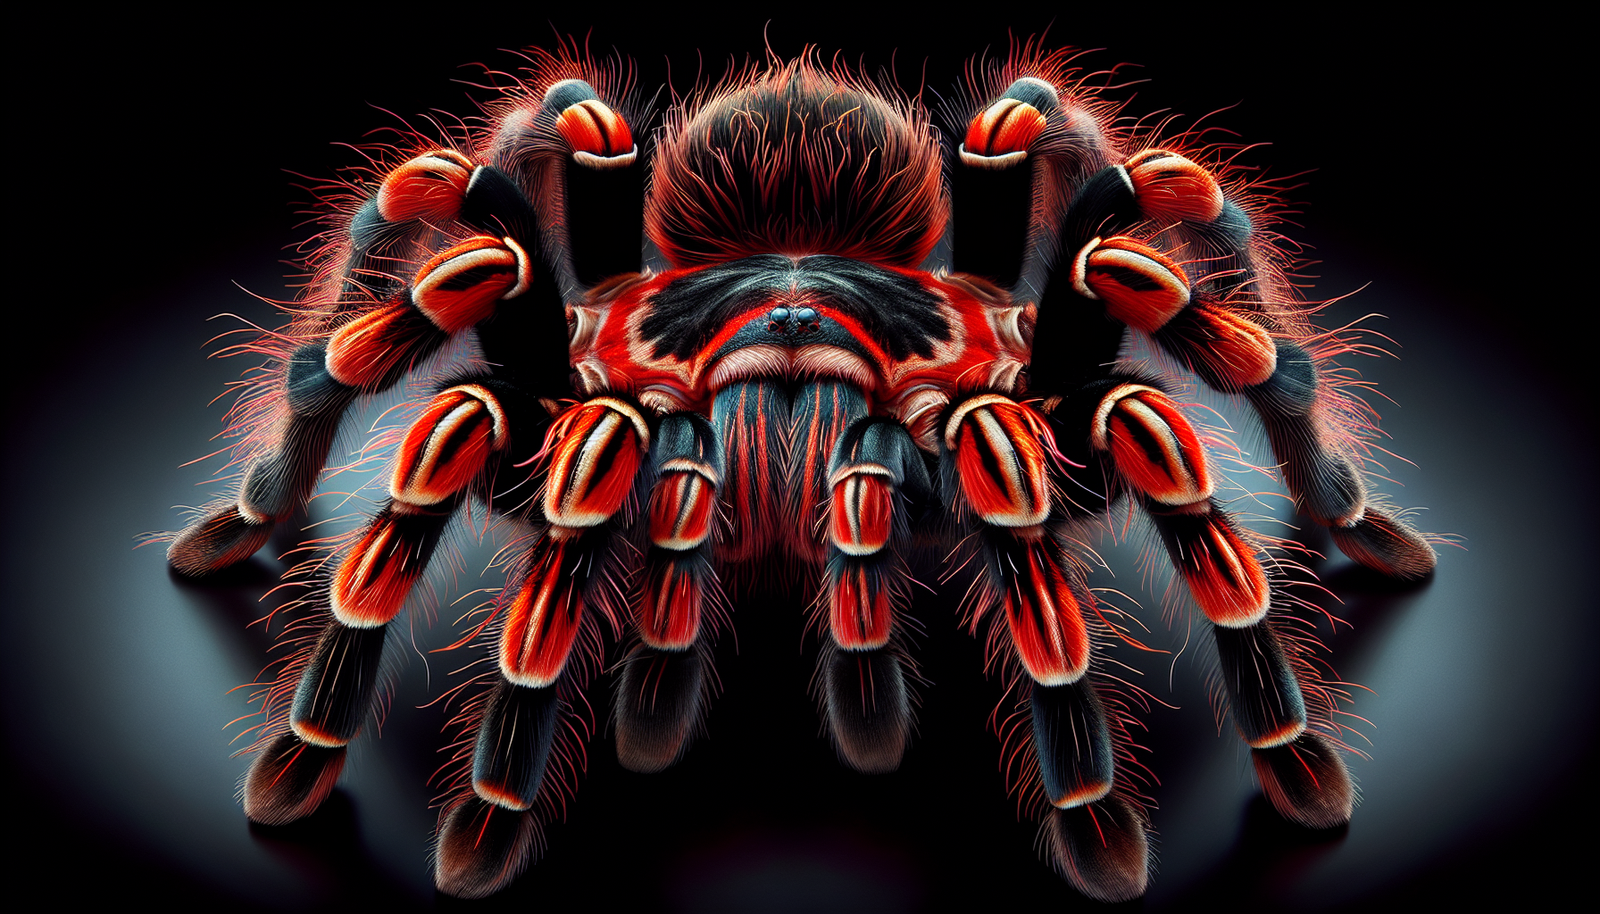 What Are The Fascinating Characteristics Of The Mexican Flame Knee Tarantula?